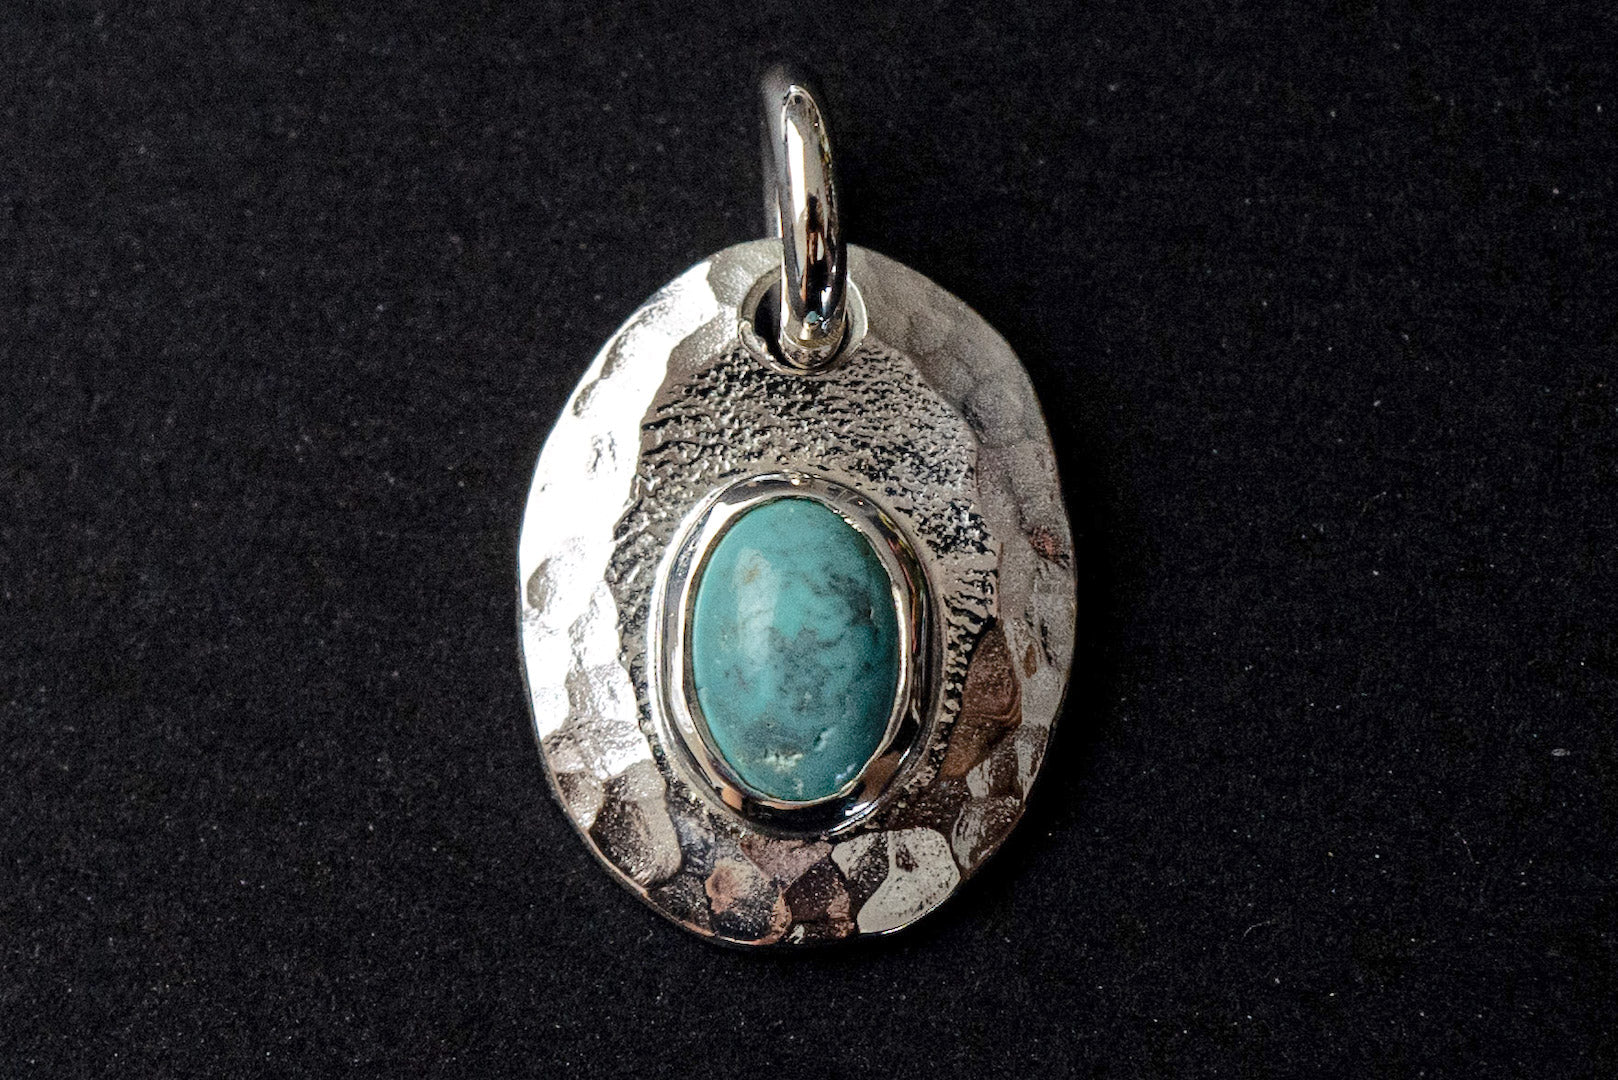 Legend Size Small "Plate" Pendant With Turquoise (P-1-TQ)